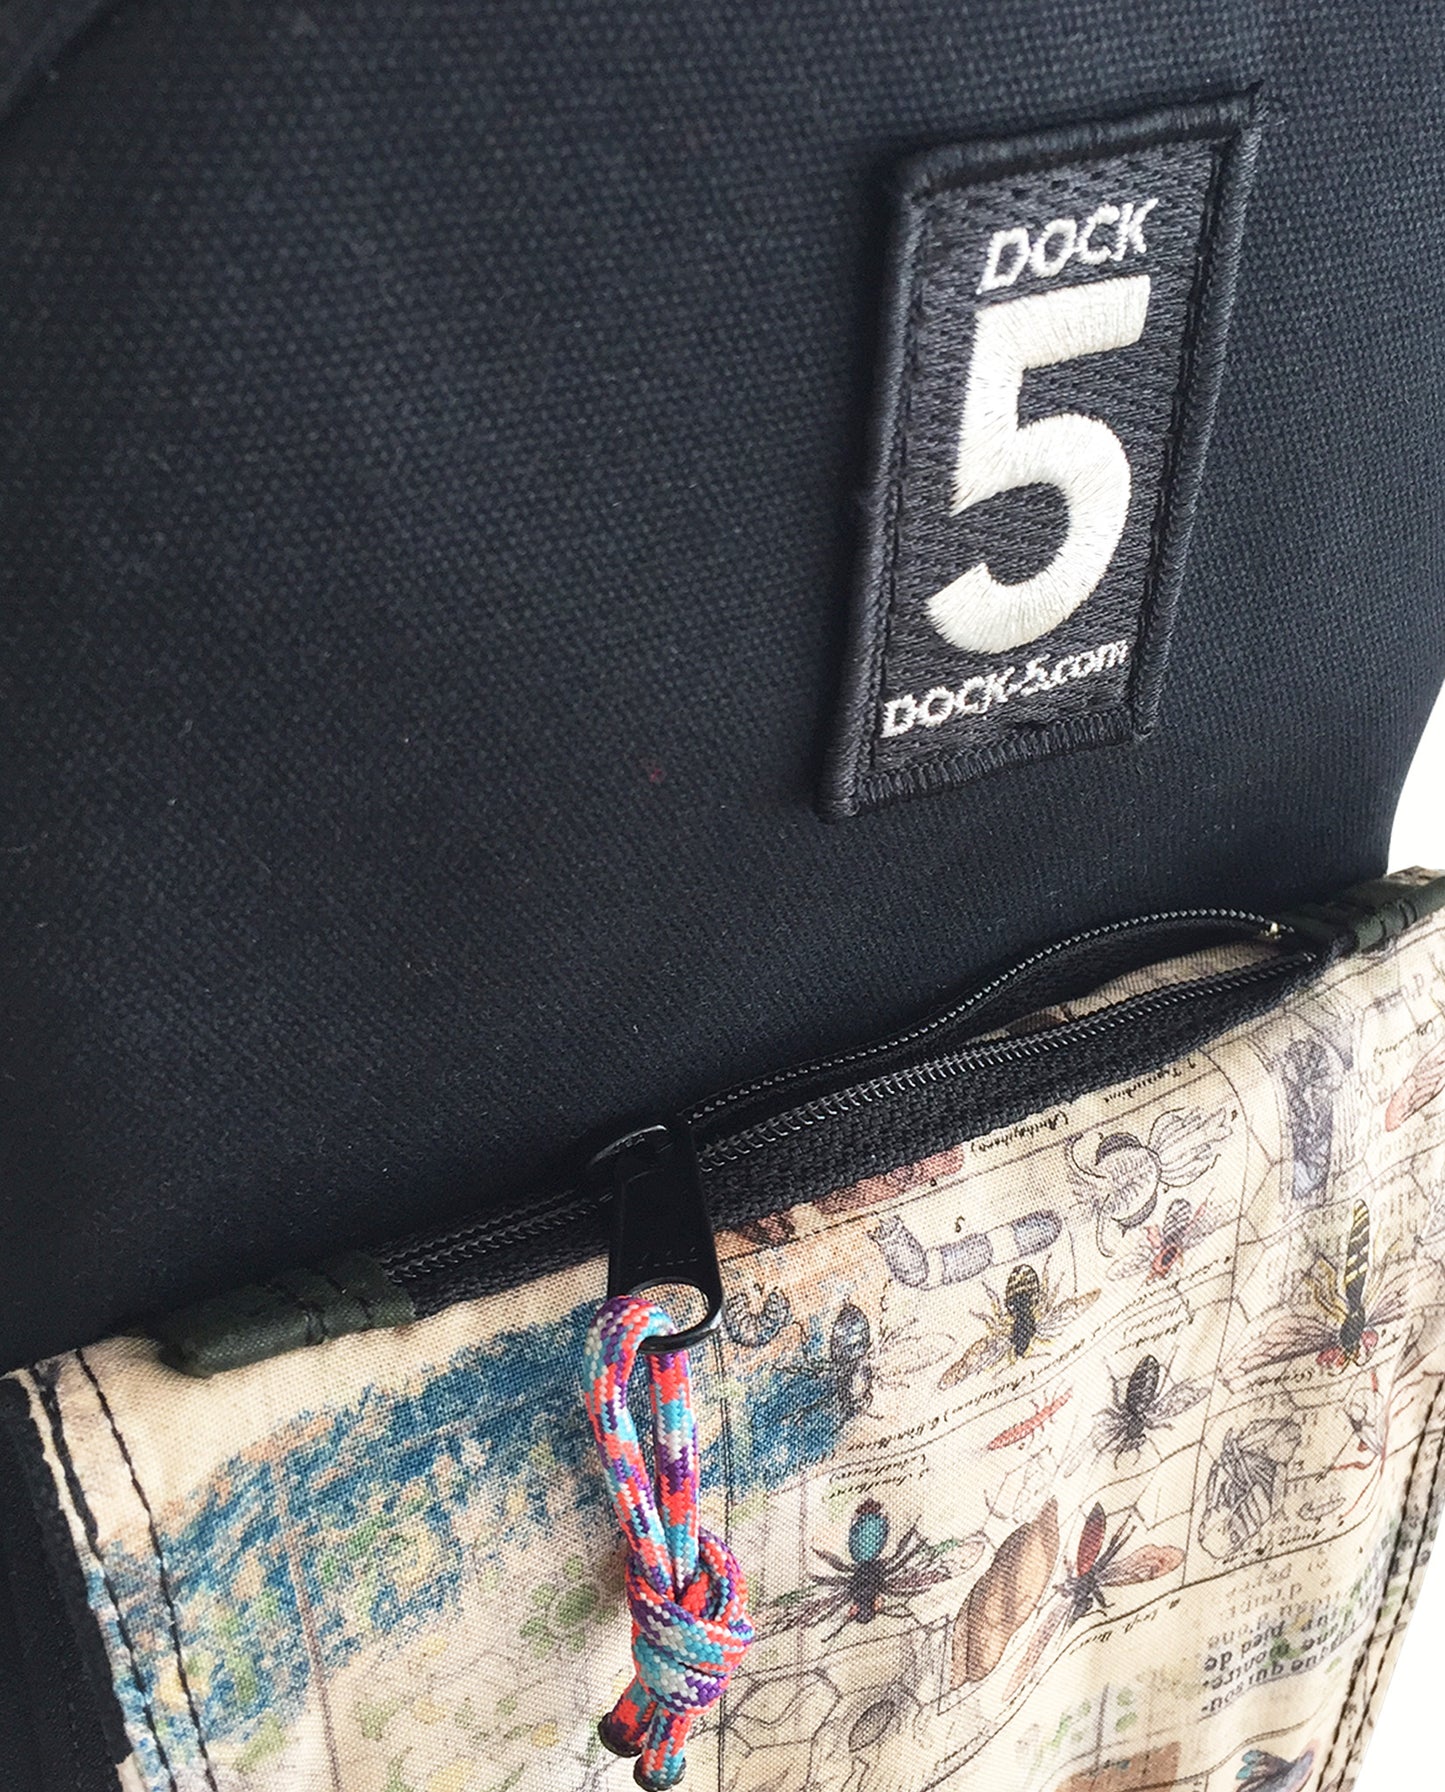 Front flap covers a zipper phone pocket, of Dock 5’s spacious, hand-sewn Dragonfly  Canvas Sling Bag